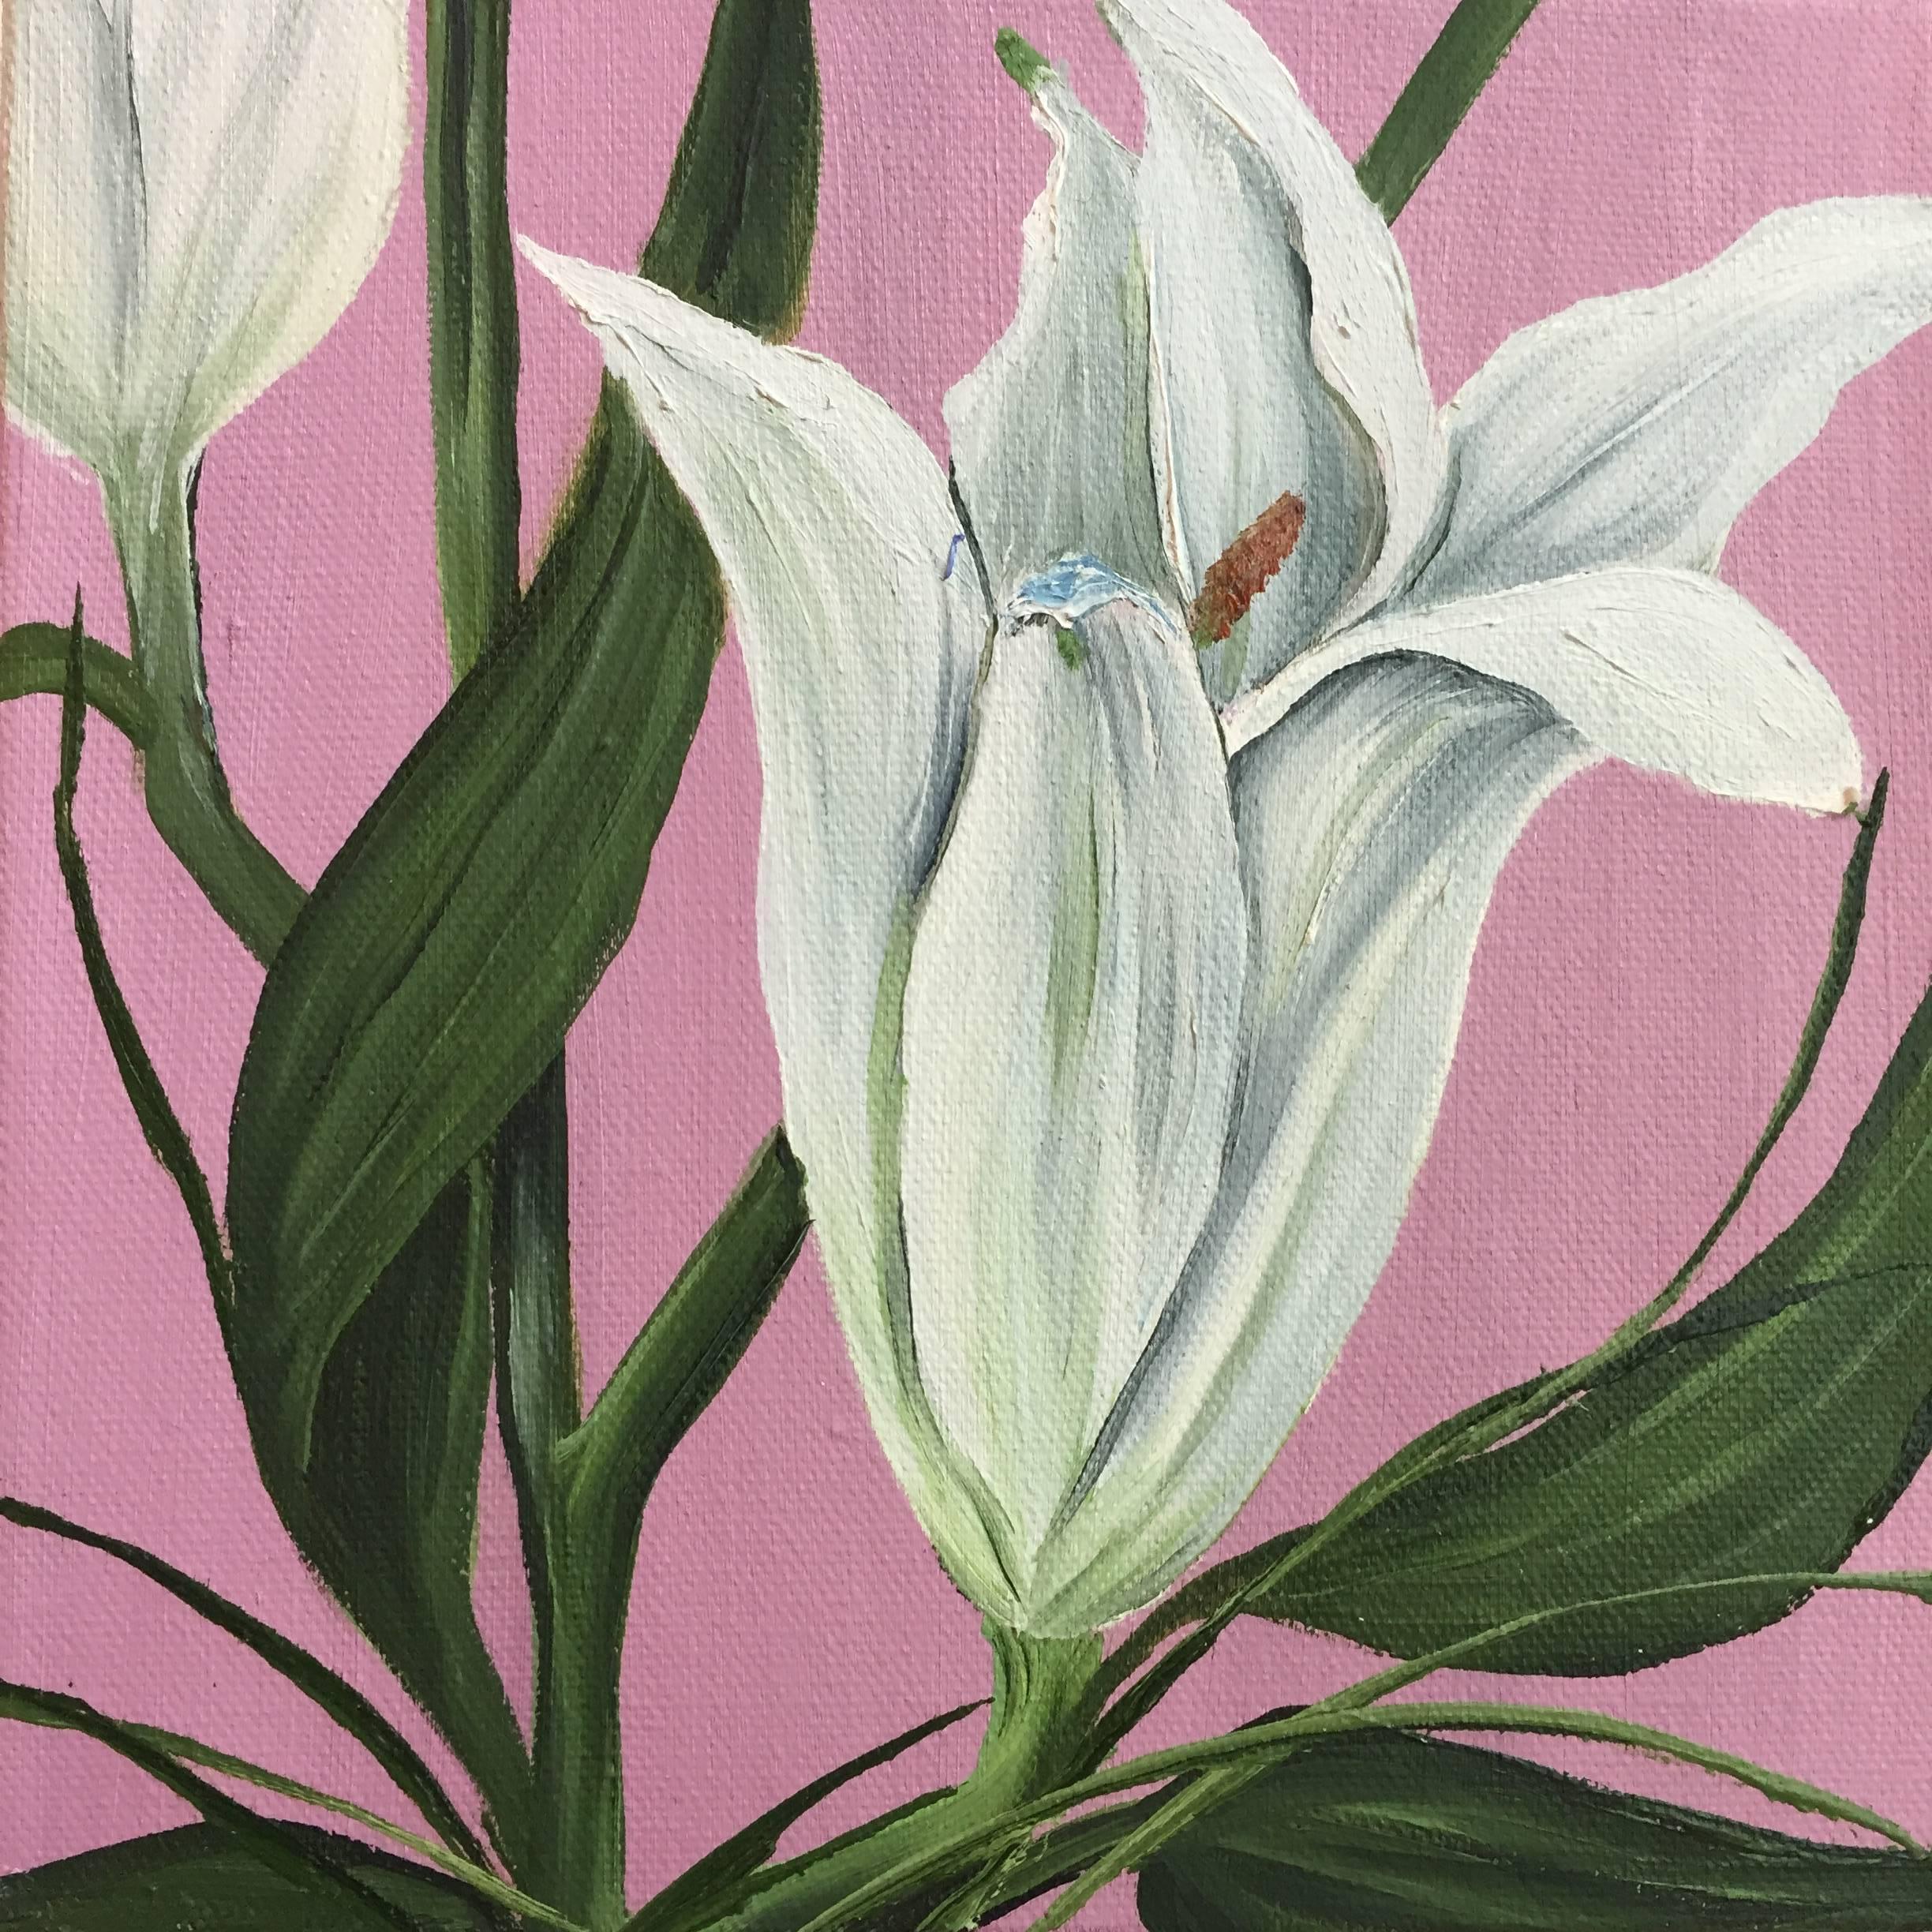 Allison Green Figurative Painting - Garden Study 3, oil on canvas, 8 x 8 inches. Blooming flower painting